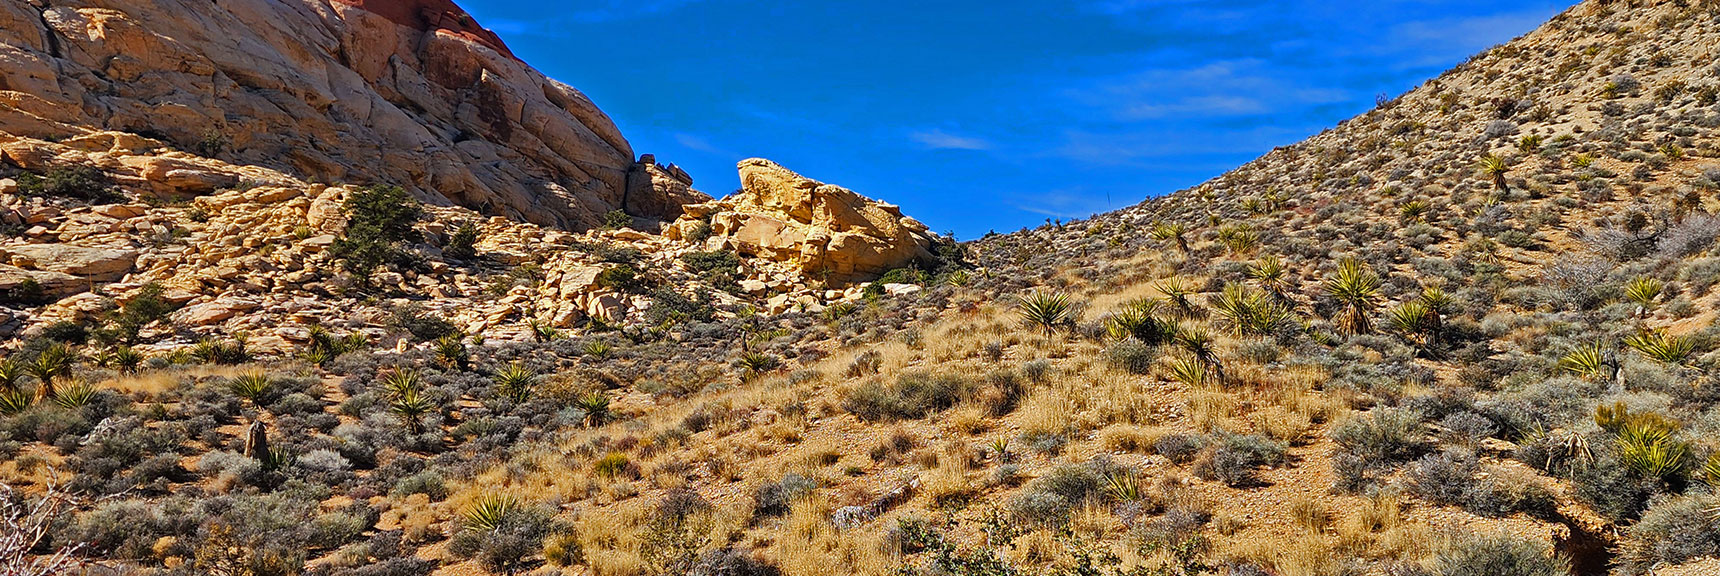 Aim for the Right Side of That Rock Formation to Find the Rattlesnake Trail. | Upper Calico Hills Loop | Calico Basin and Red Rock Canyon, Nevada